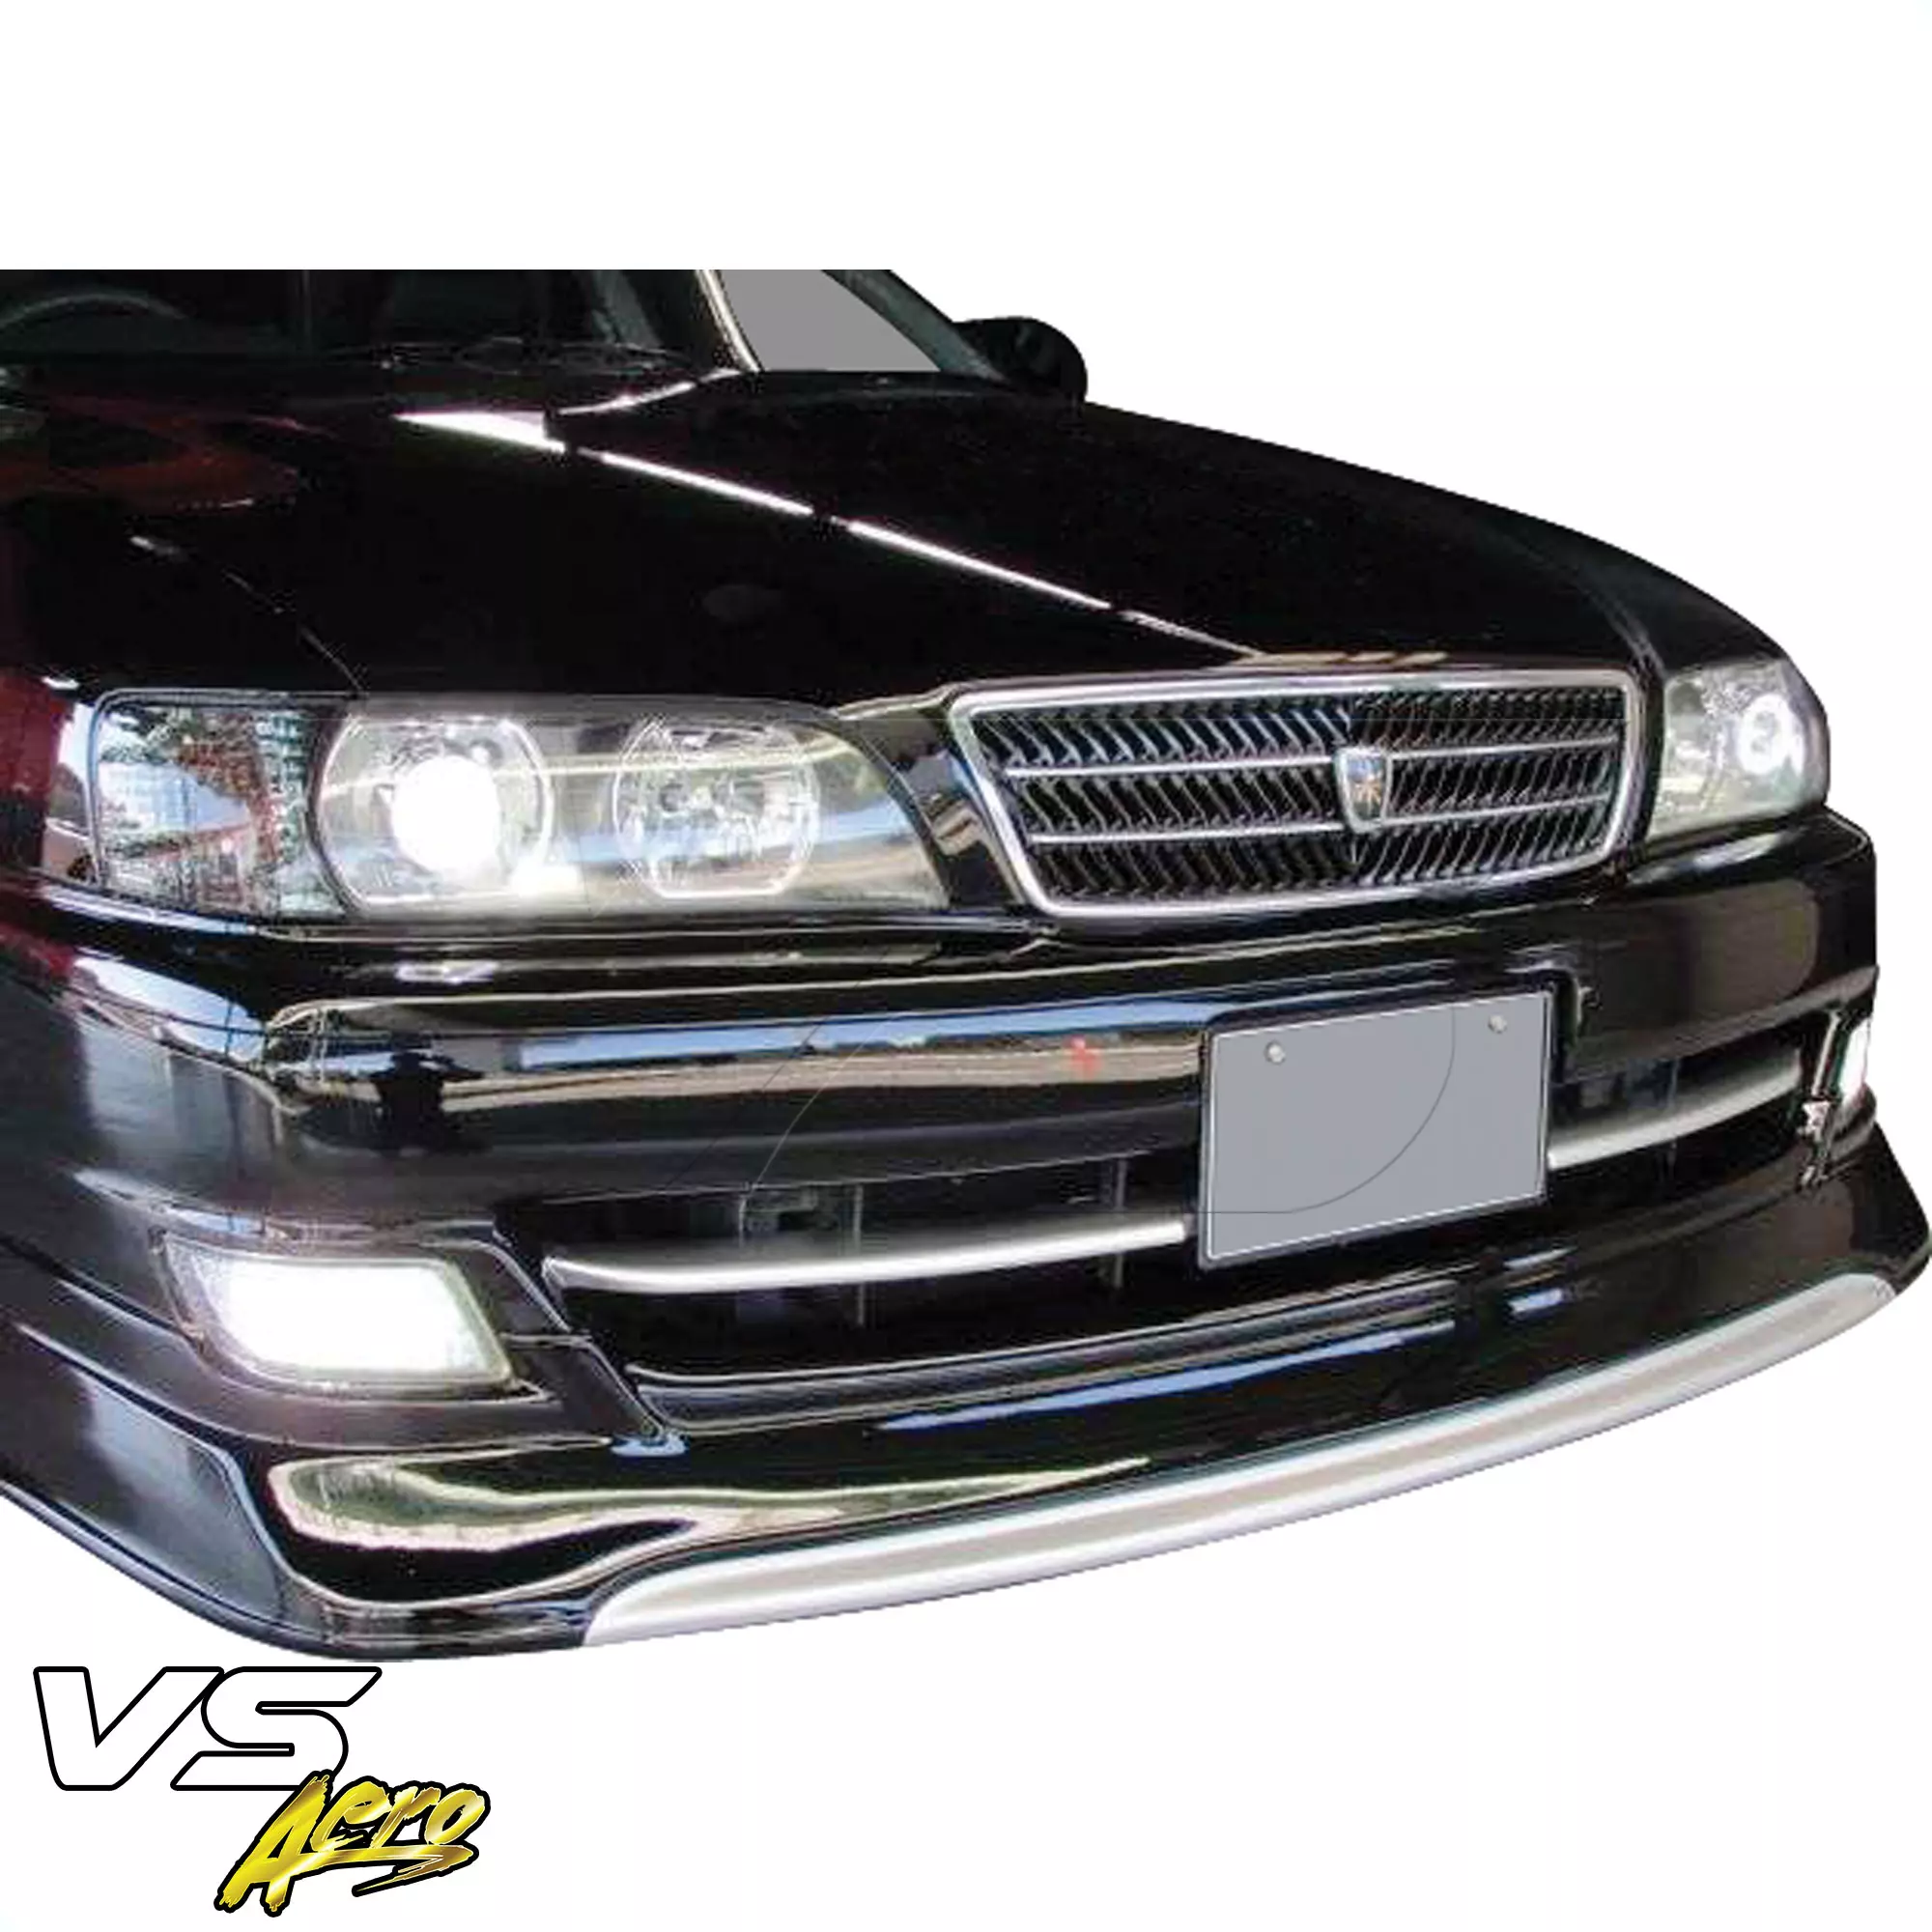 VSaero FRP TRAU Late Front Lip Valance > Toyota Chaser JZX100 1999-2000 - Image 18